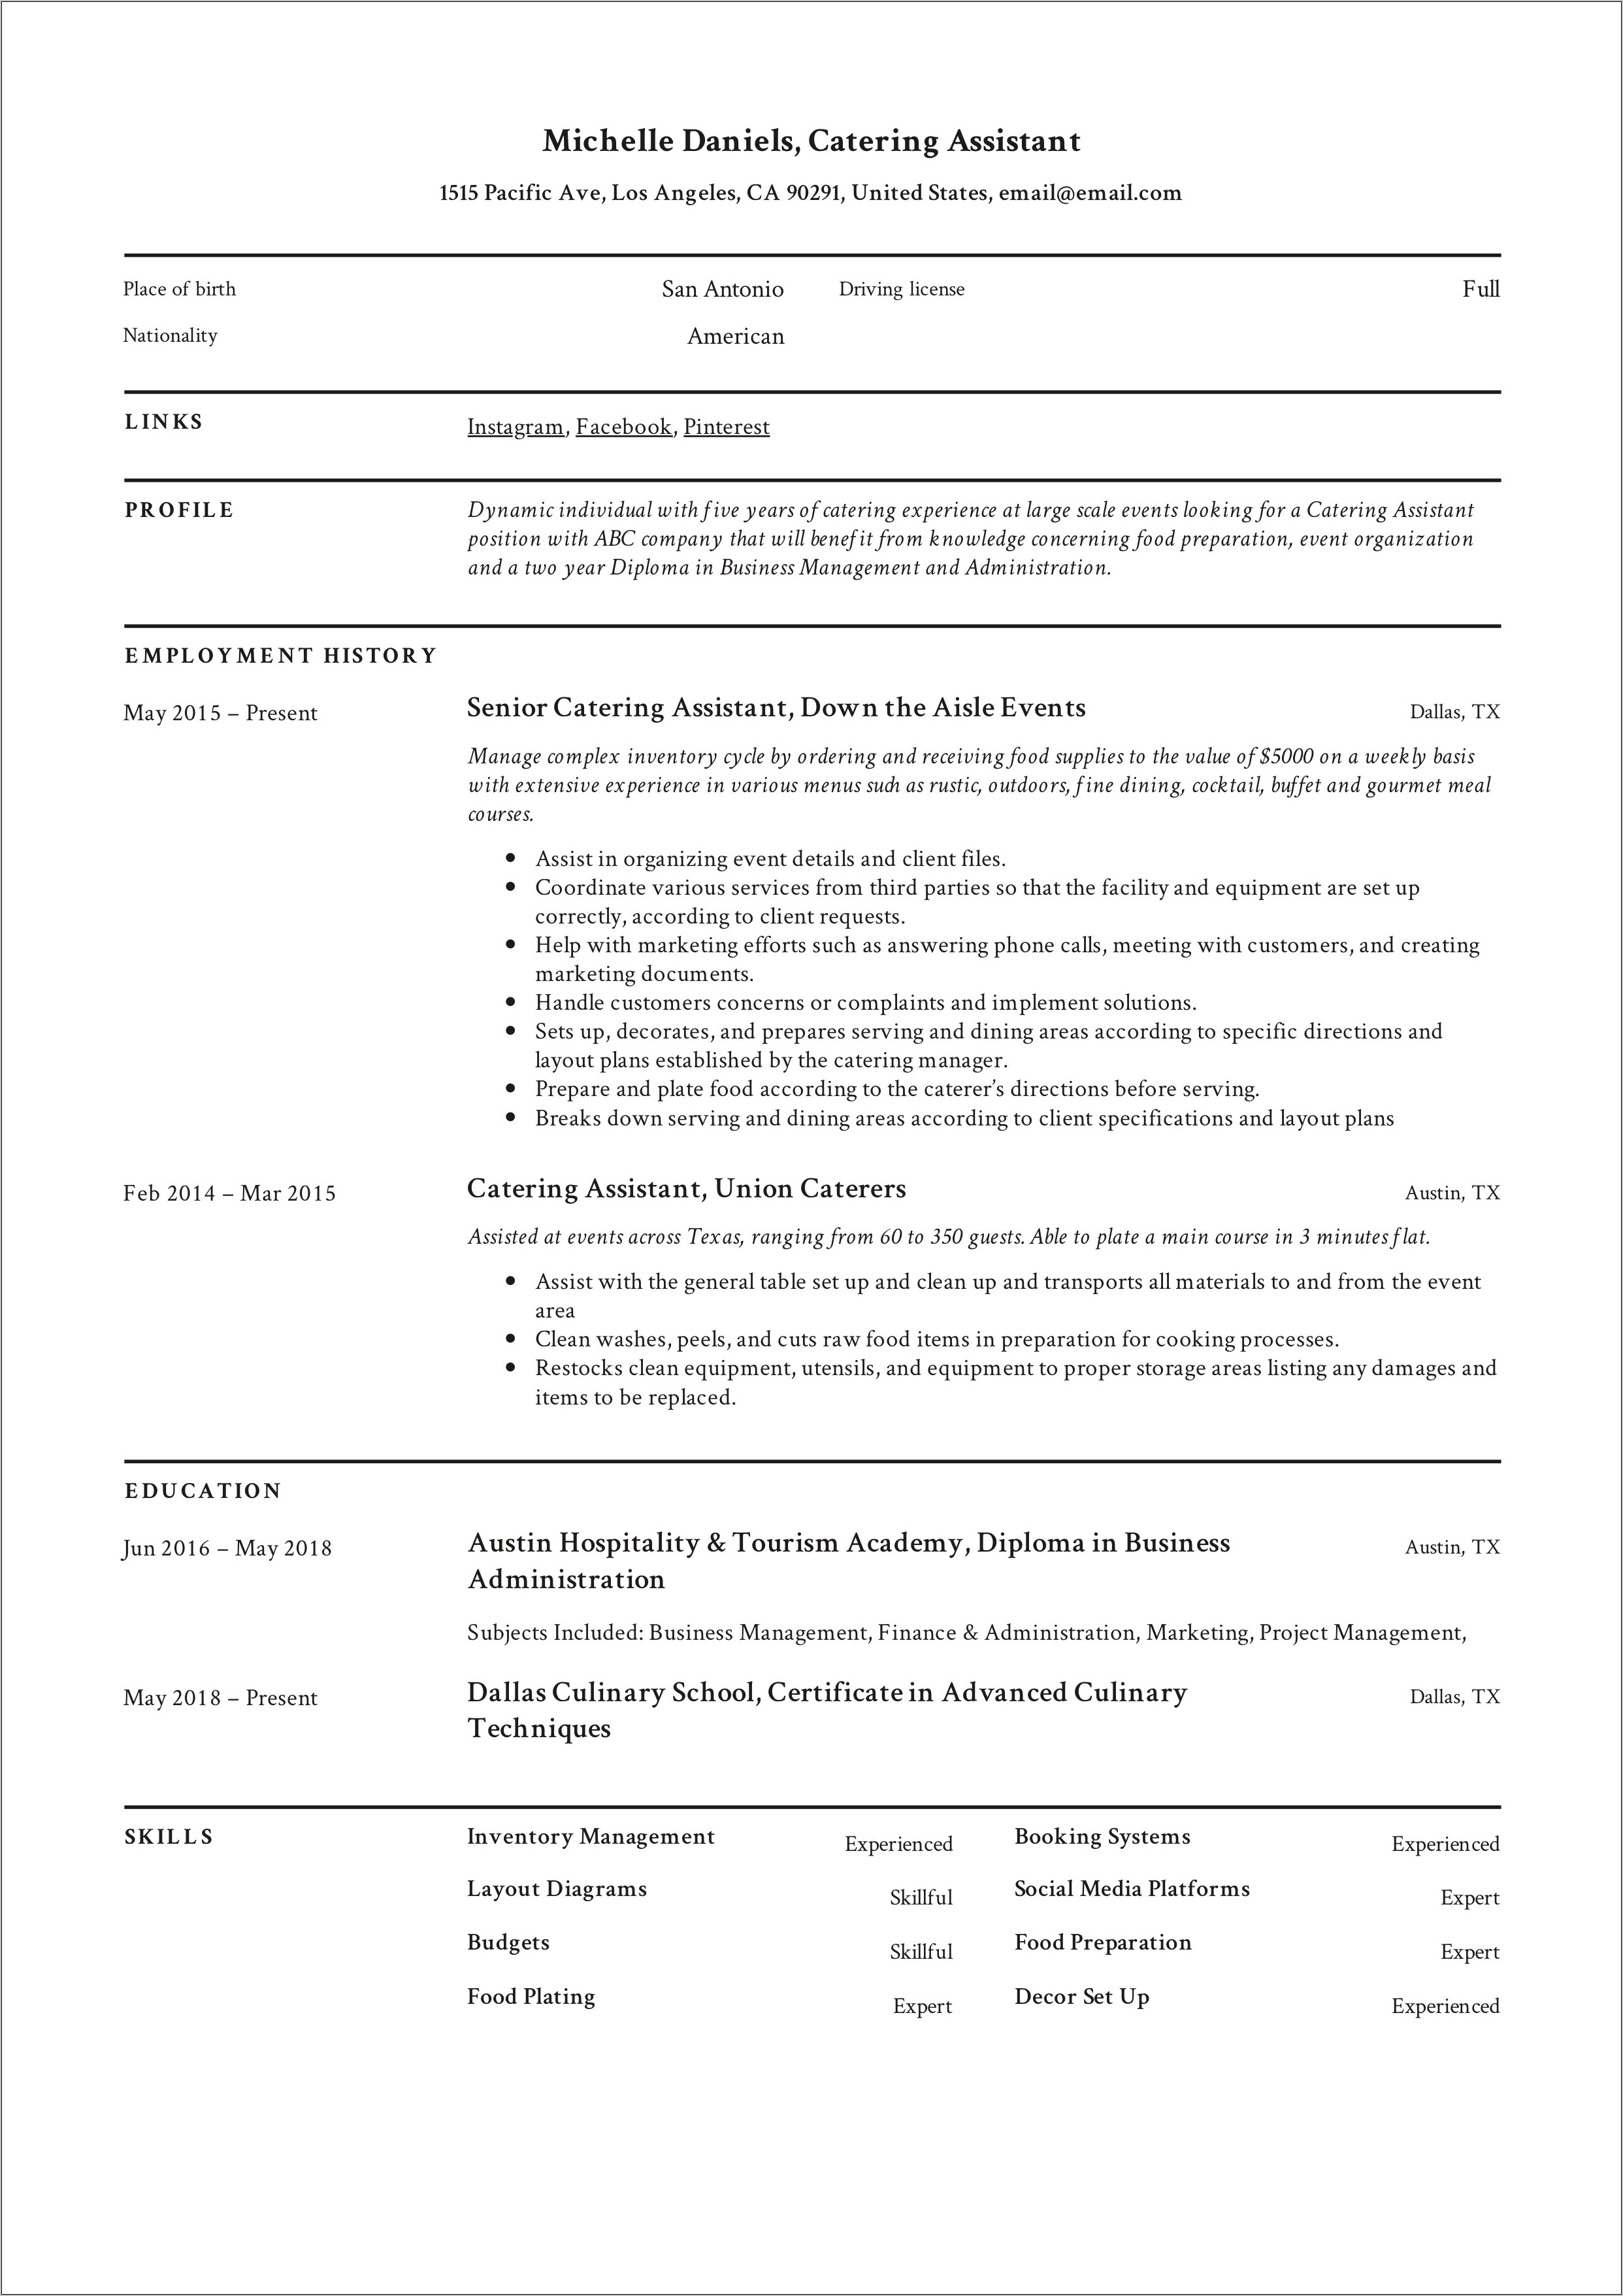 Examples Of Objectives For Teacher Aid Resume